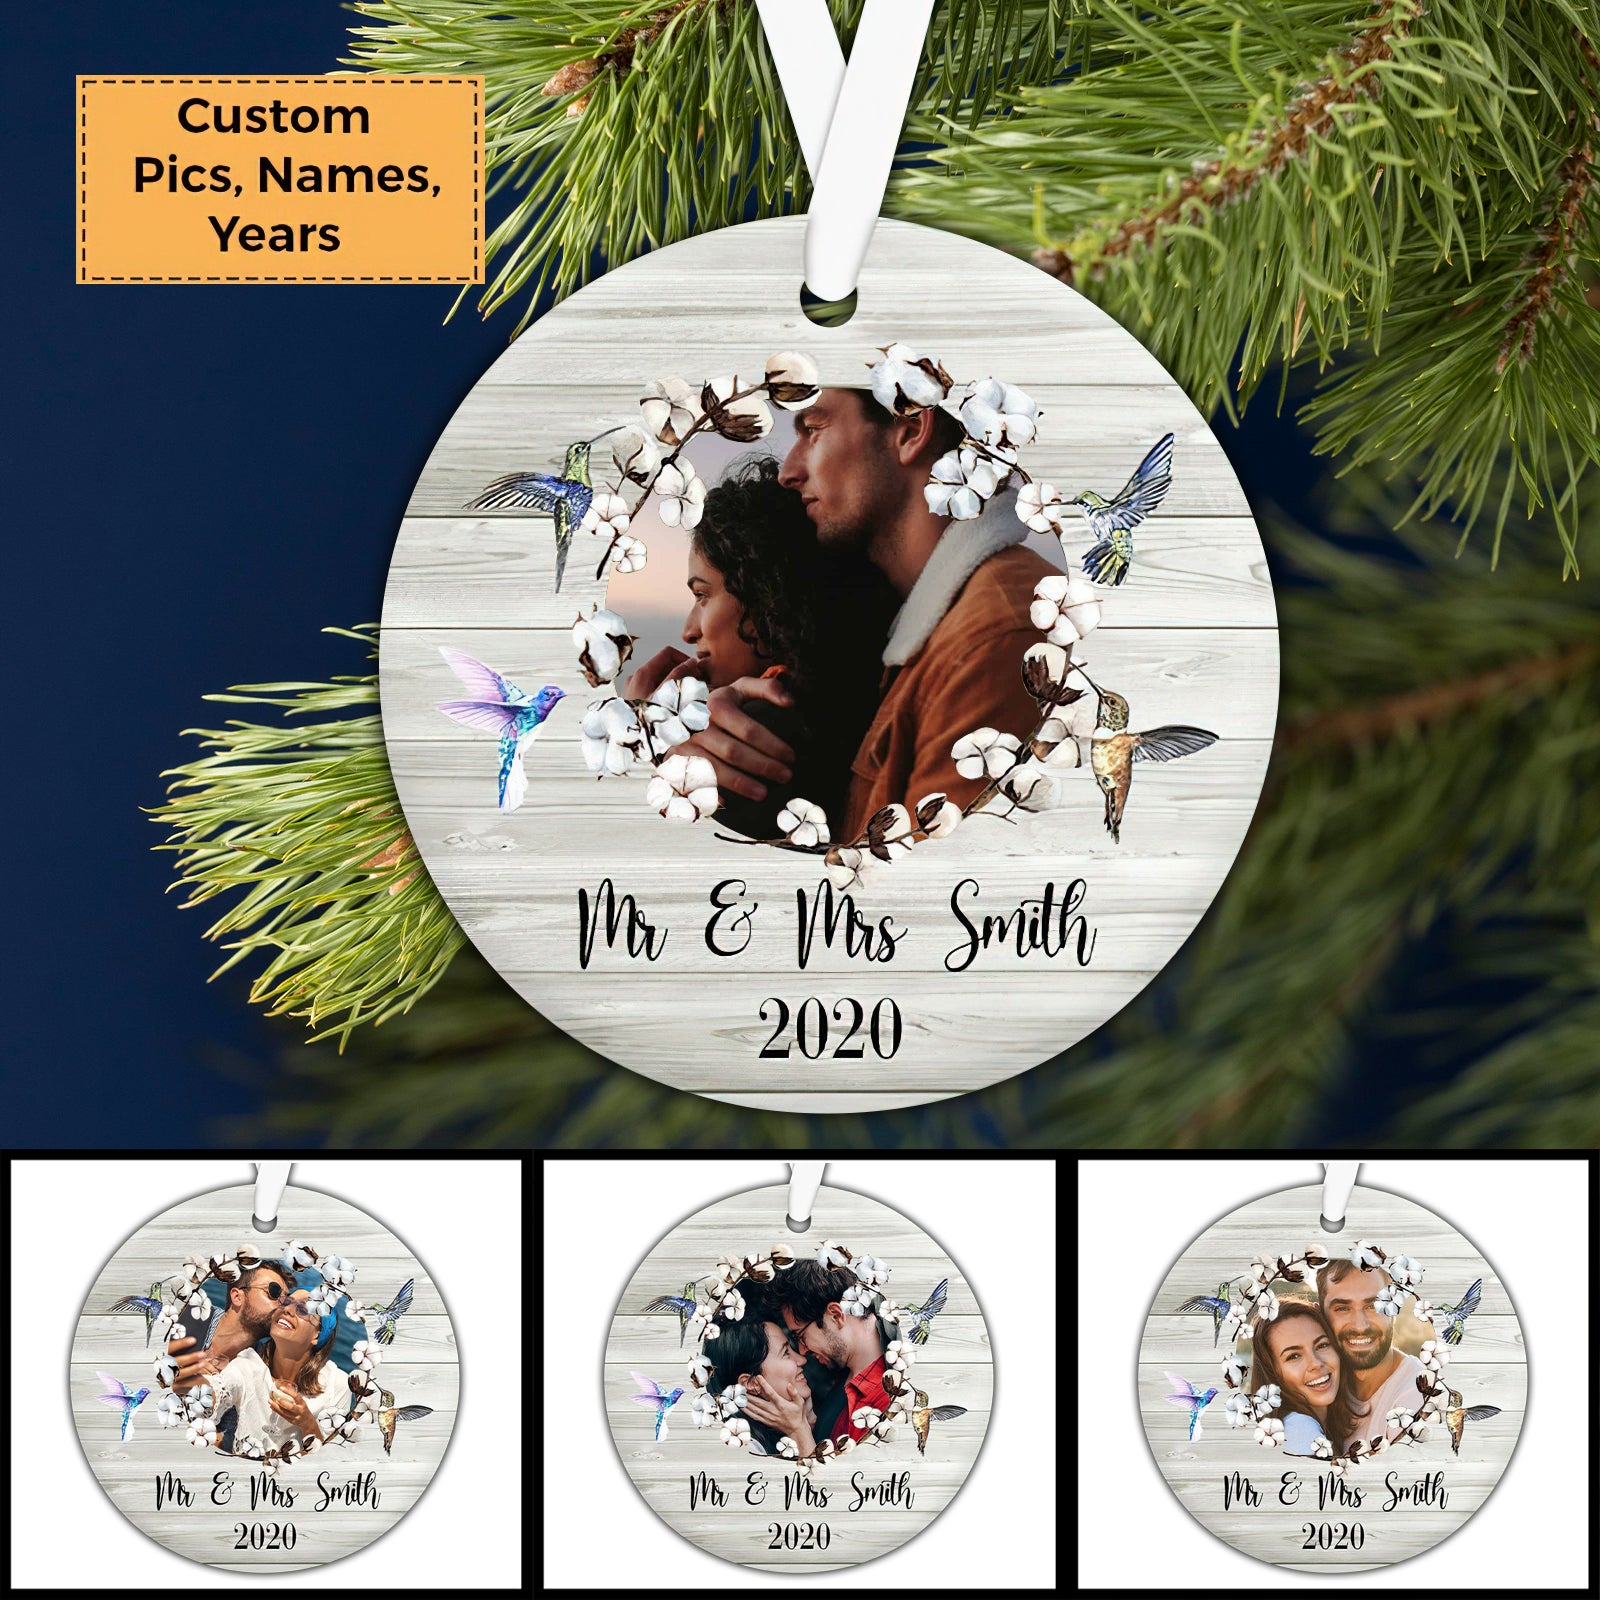 Custom Photo With Couple Ceramic Ornament, Custom Photo Ornament With Spouse, Sweet Photo - Christmas Ornament Gift For Couple, Lover, Anniversary